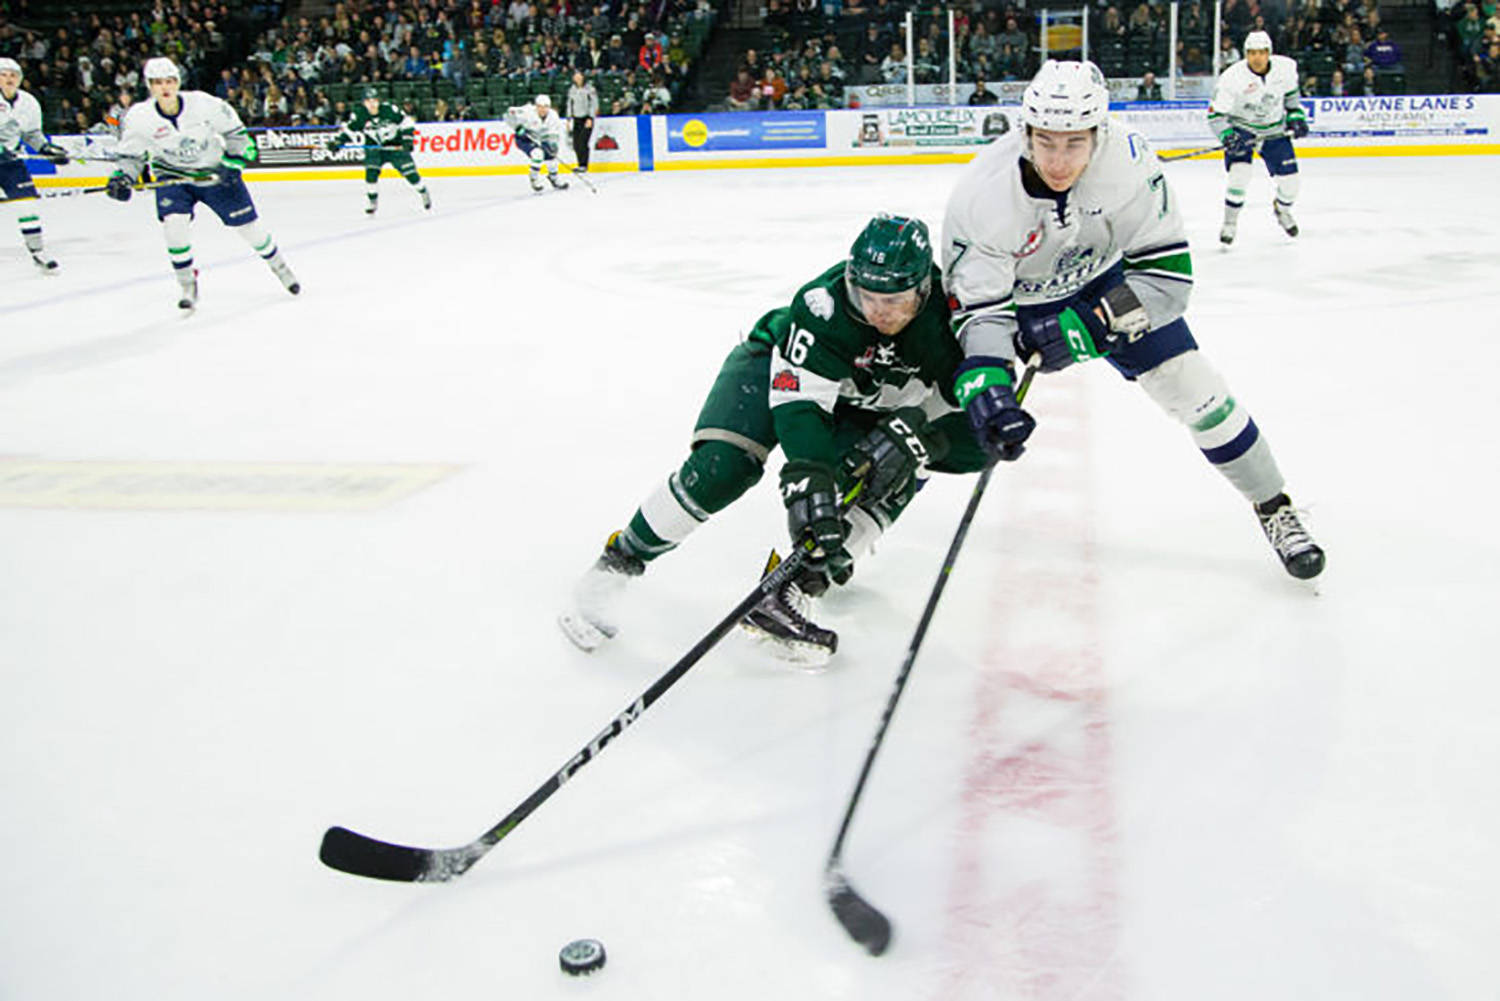 Thunderbirds defenseman Reece Harsch, right, and Silvertips winger Luke Ormsby reach for the puck during WHL play Friday night at Xfinity Arena. COURTESY PHOTO, Chris Mast